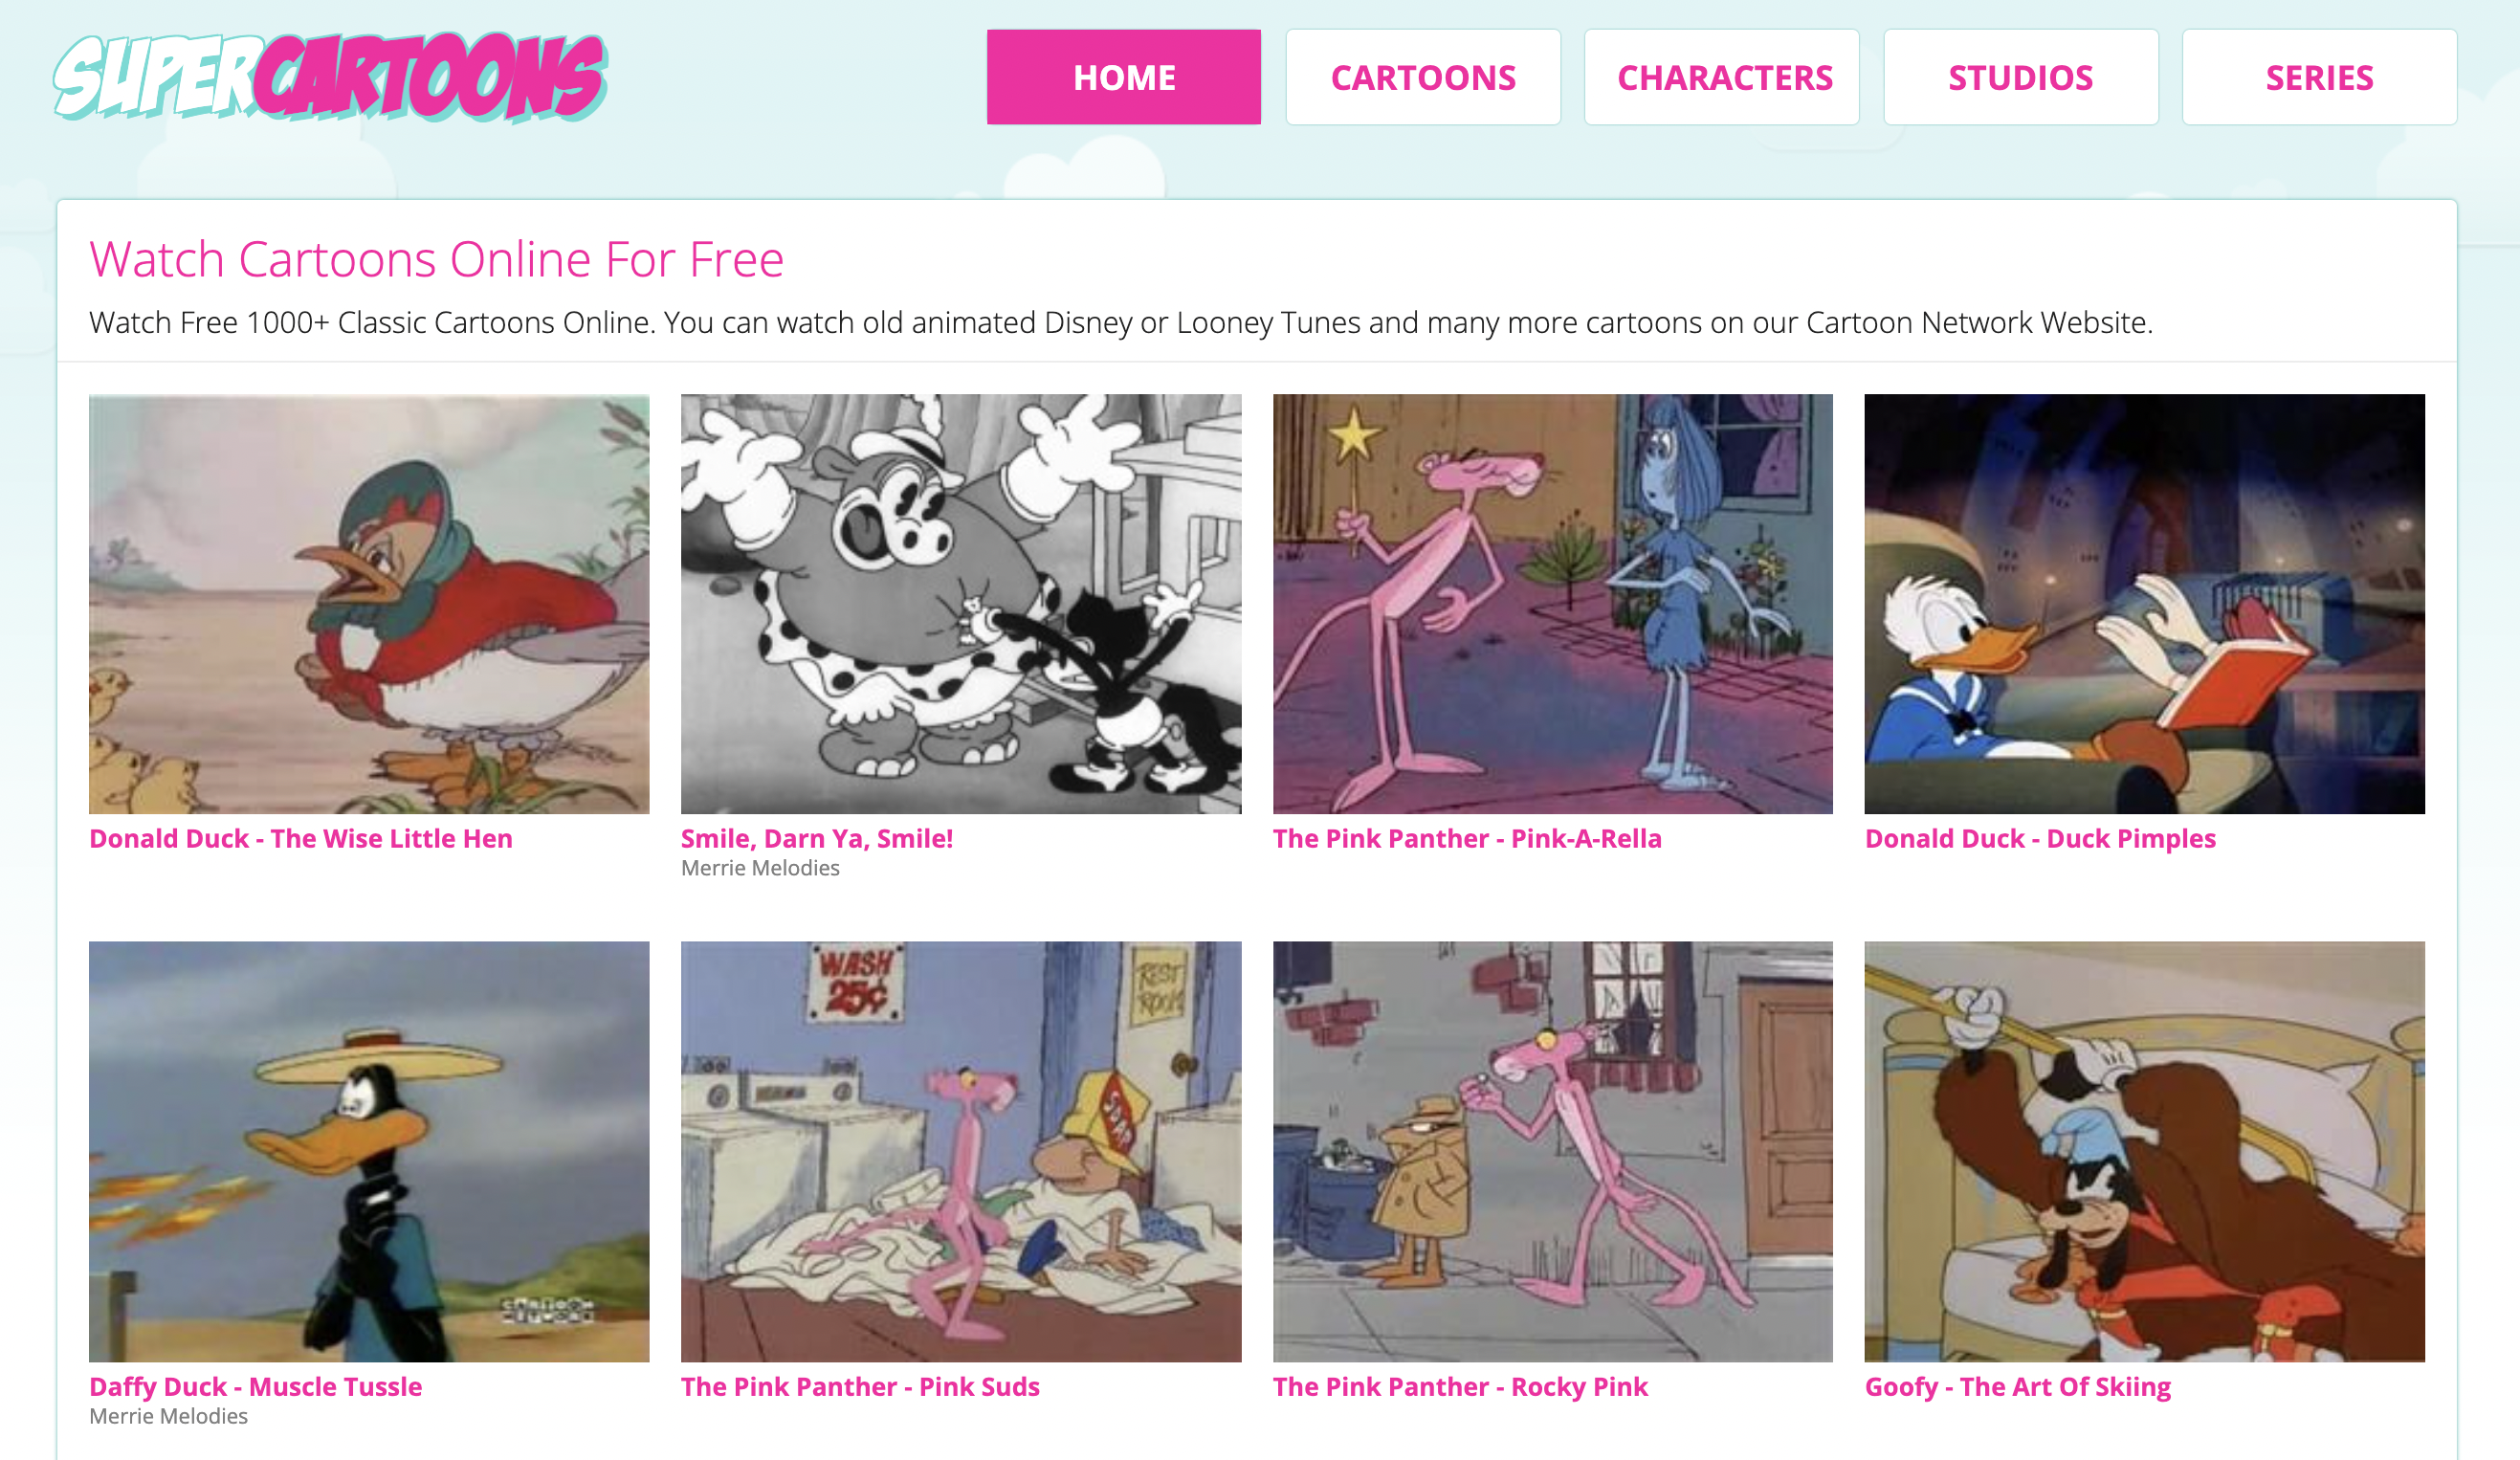 How to Watch Cartoons Online for Free in HD (No Piracy!)